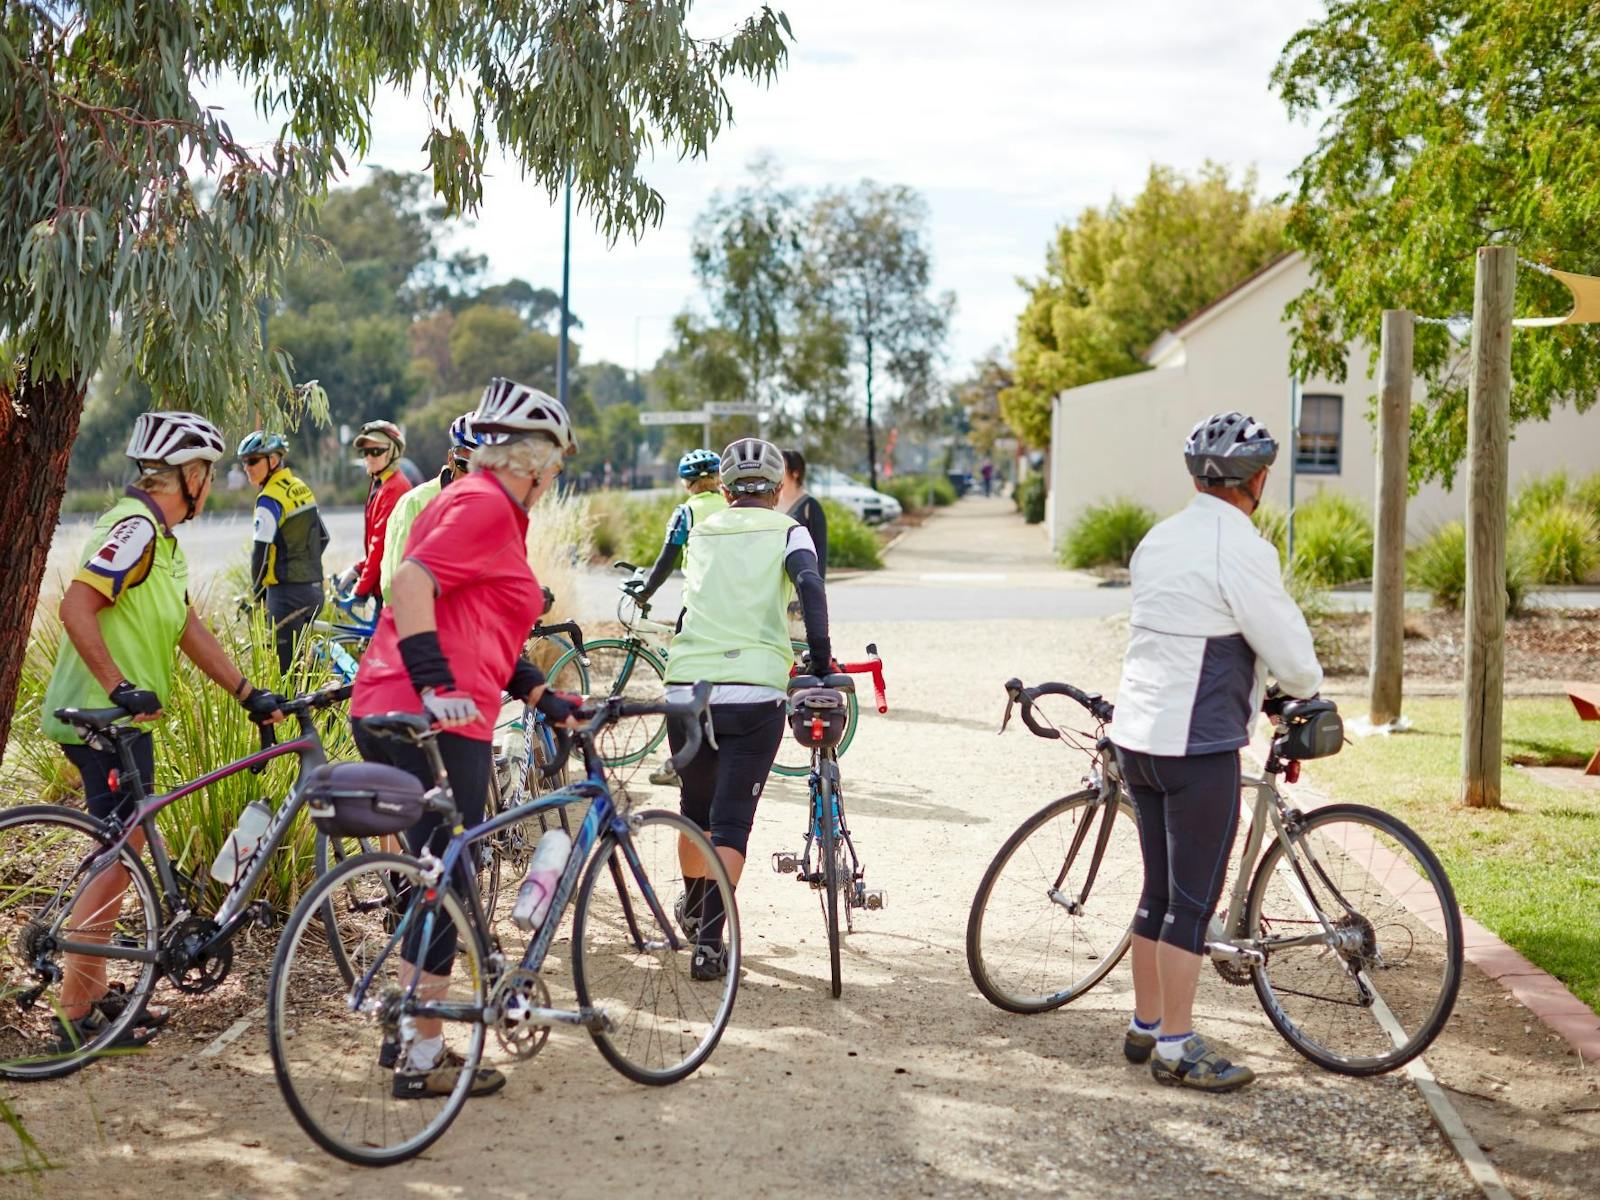 A number of cyclists on the footpath buildings cars trees shrubs in background at Glenrowan